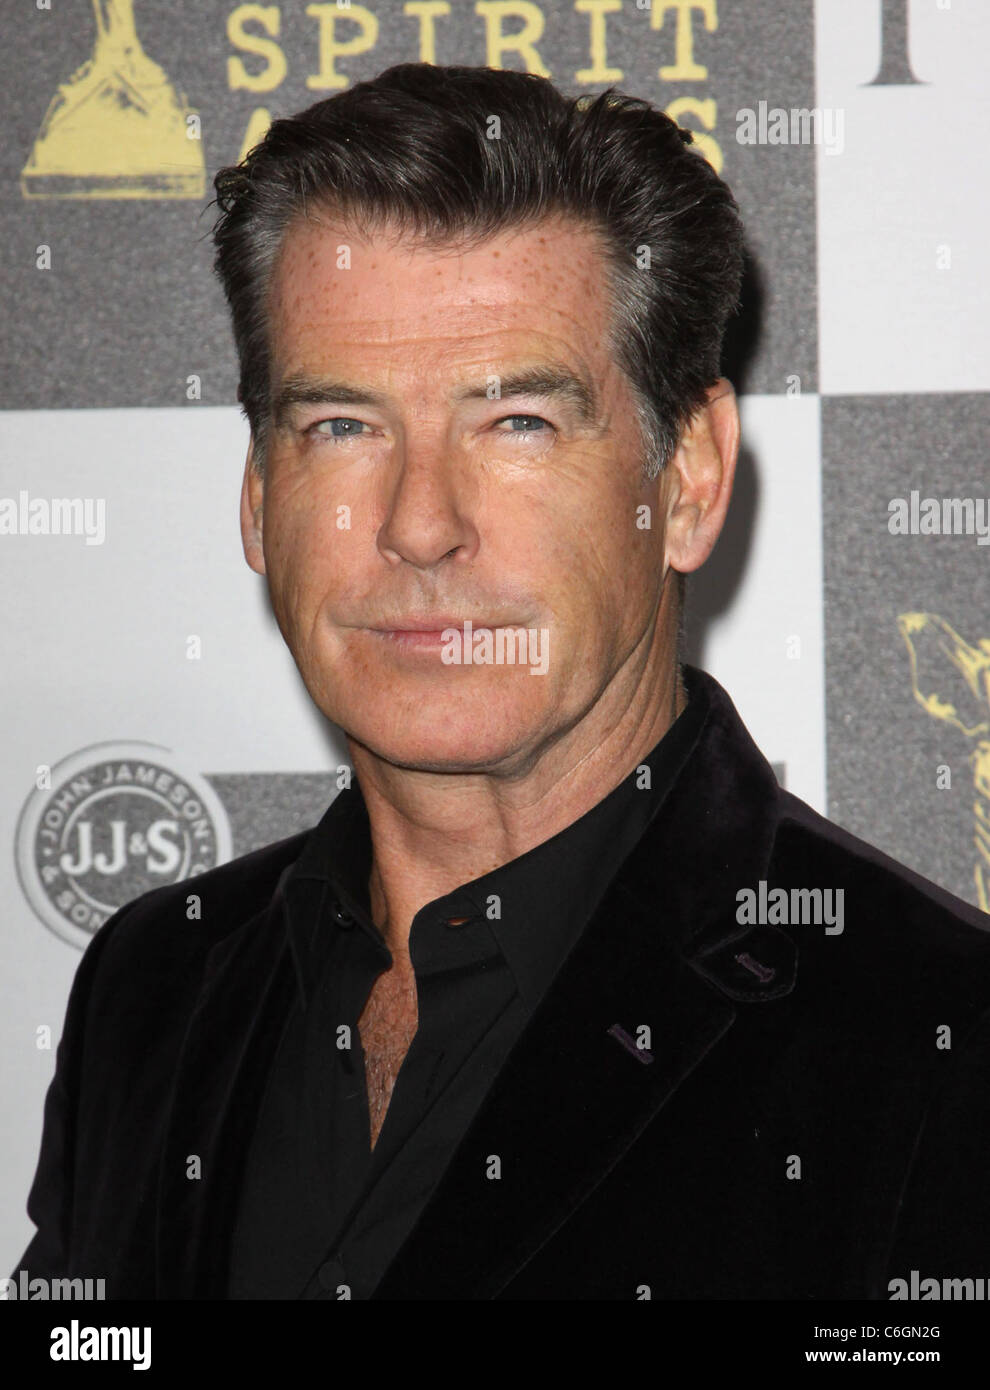 Pierce Brosnan The 25th Film Independent Spirit Awards Held At The Nokia La Live Los Angeles 